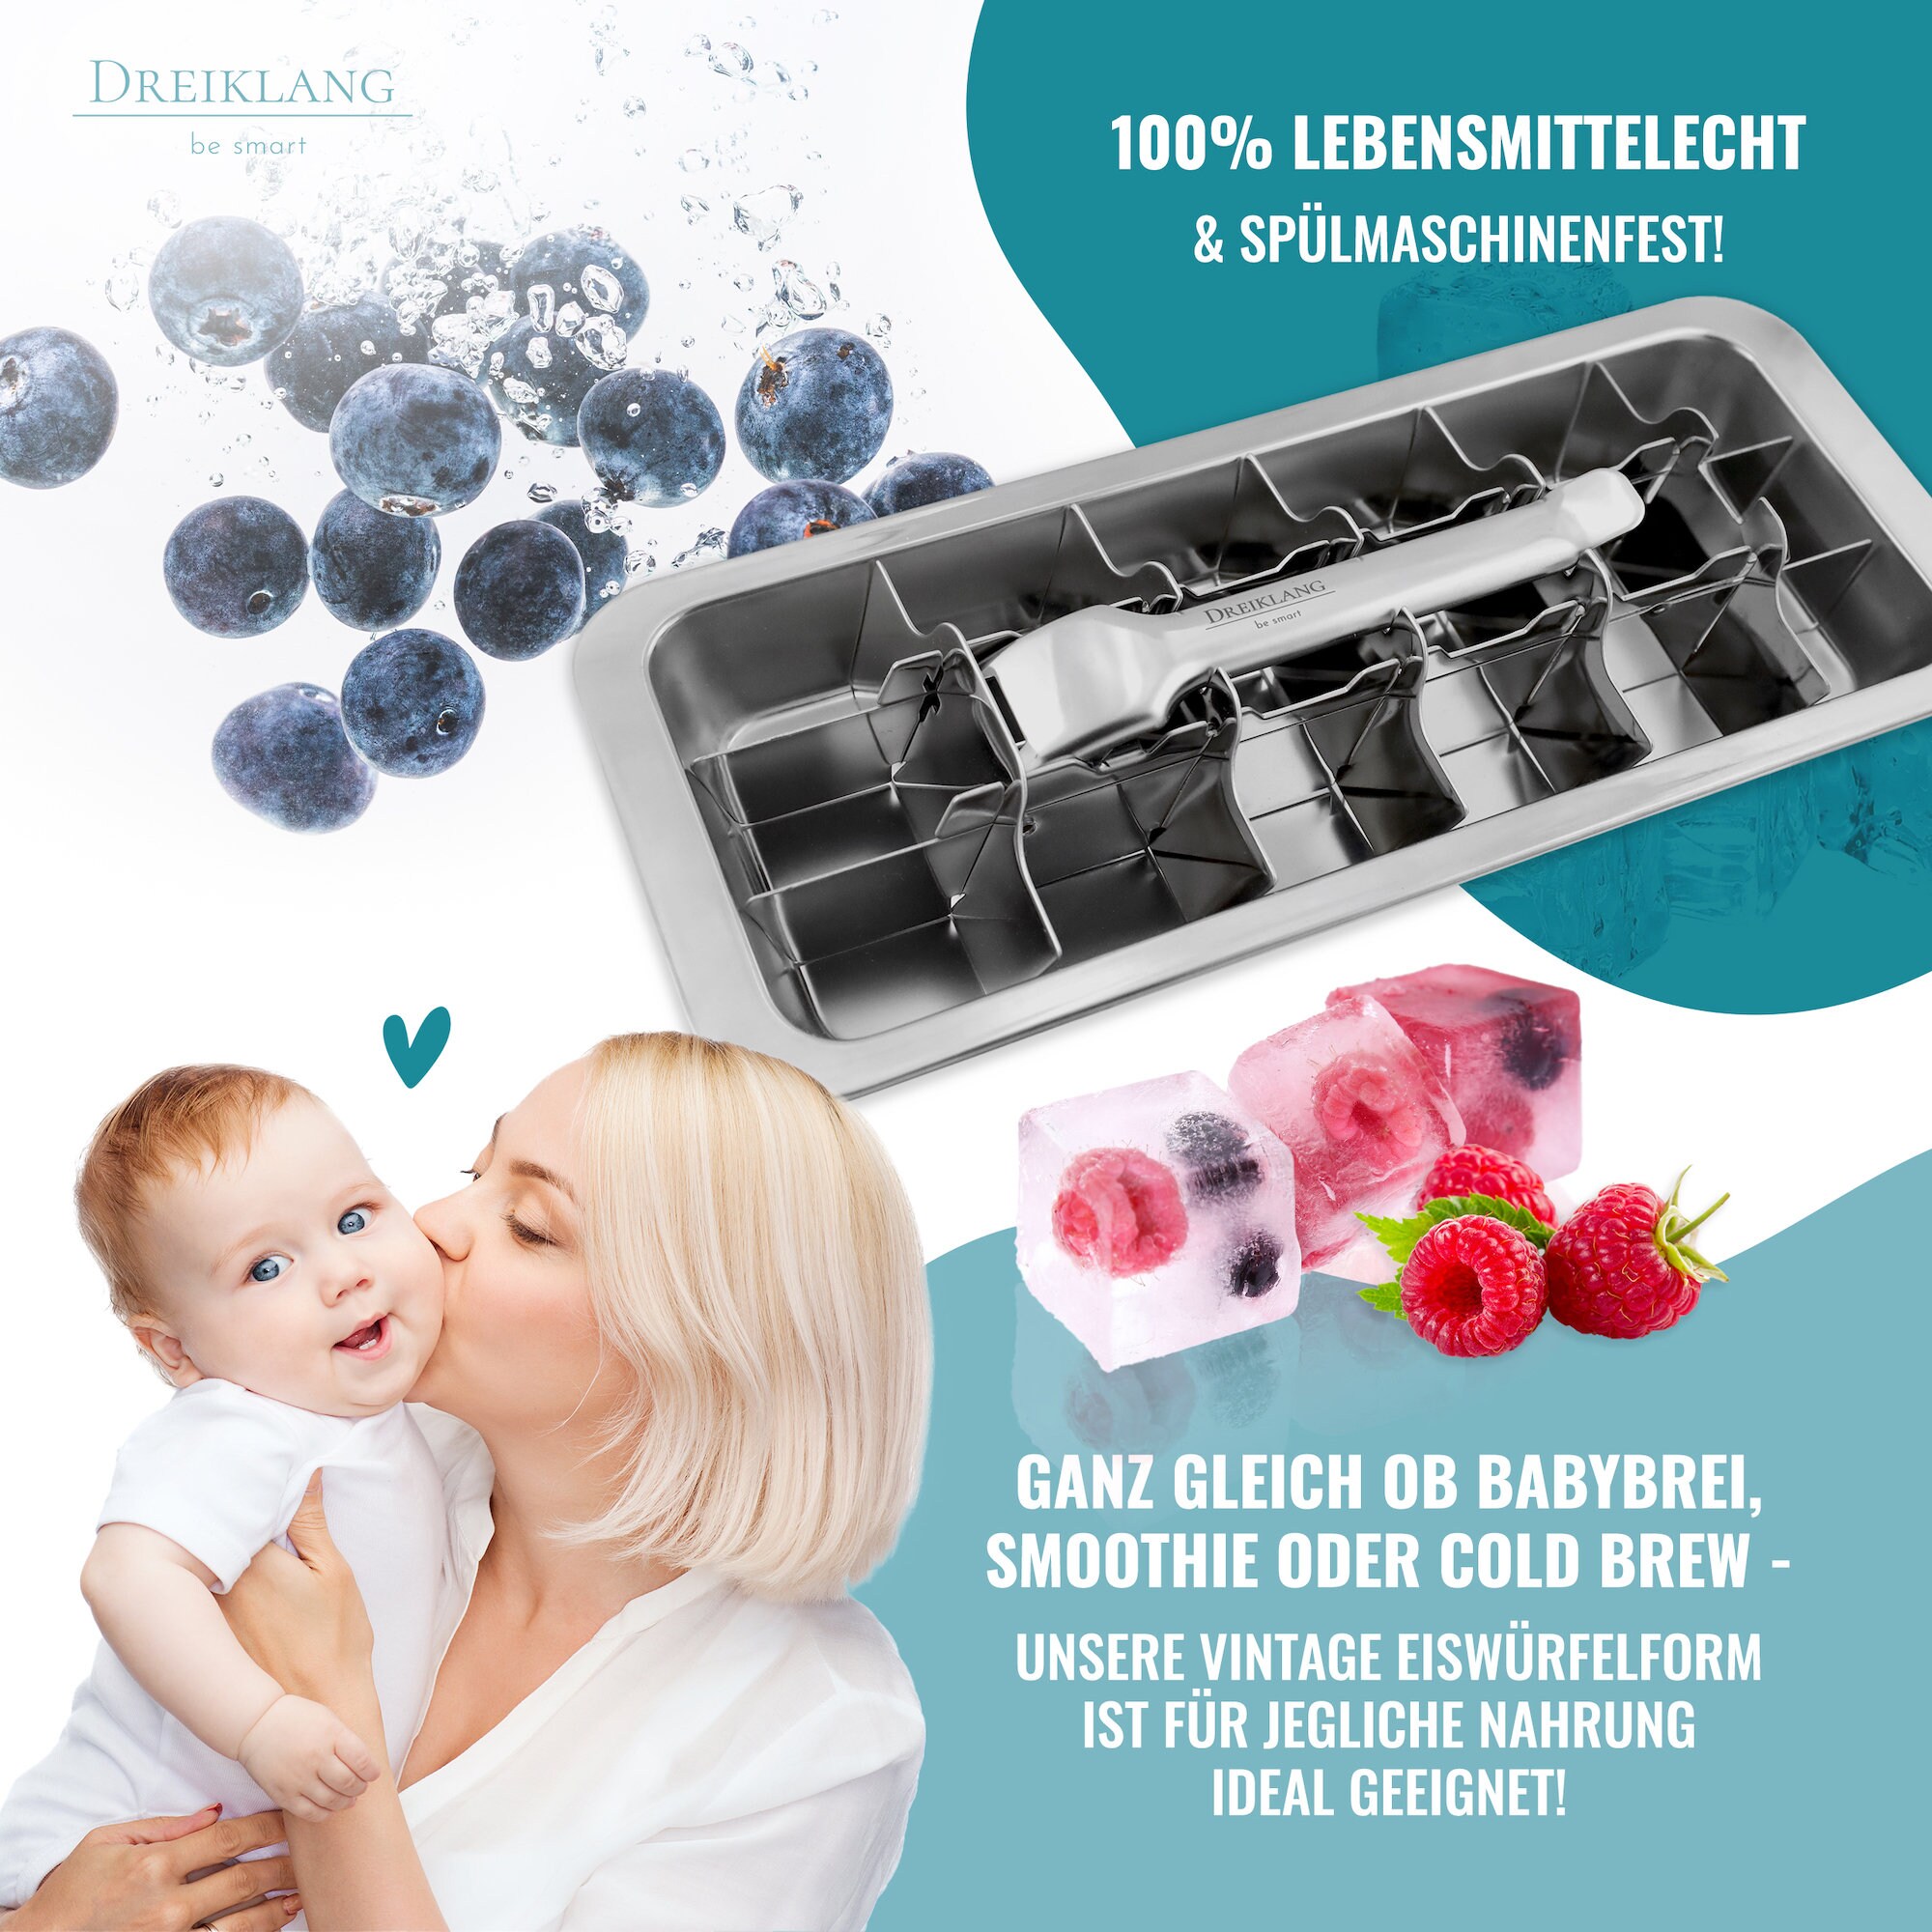  Stainless Steel Ice Cube Maker Tray,Lever Style Ice Cube Mold  Quick To Making 18 Ice Cubes: Home & Kitchen